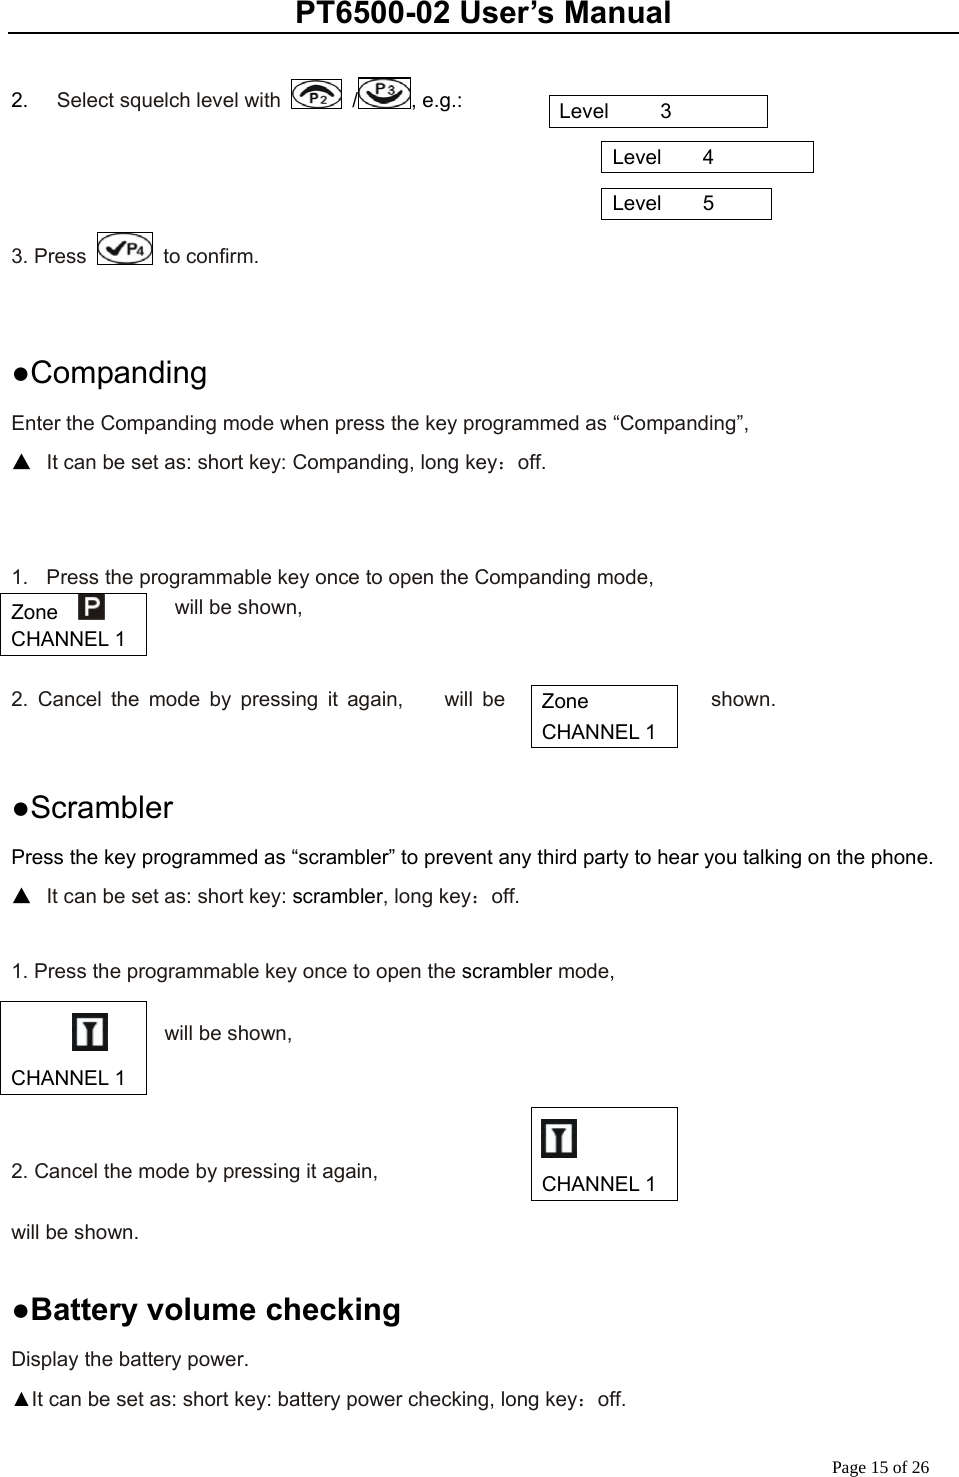 PT6500-02 User’s Manual Page 15 of 26  2.    Select squelch level with   / , e.g.:                                                                                        3. Press   to confirm.   ●Companding Enter the Companding mode when press the key programmed as “Companding”,   ▲  It can be set as: short key: Companding, long key：off.   1.  Press the programmable key once to open the Companding mode,           will be shown,   2. Cancel the mode by pressing it again,    will be  shown.        ●Scrambler Press the key programmed as “scrambler” to prevent any third party to hear you talking on the phone. ▲  It can be set as: short key: scrambler, long key：off.  1. Press the programmable key once to open the scrambler mode,      will be shown,    2. Cancel the mode by pressing it again,    will be shown.      ●Battery volume checking Display the battery power. ▲It can be set as: short key: battery power checking, long key：off. Level     3 Level    4 Level    5 Zone    CHANNEL 1 Zone   CHANNEL 1     CHANNEL 1  CHANNEL 1 